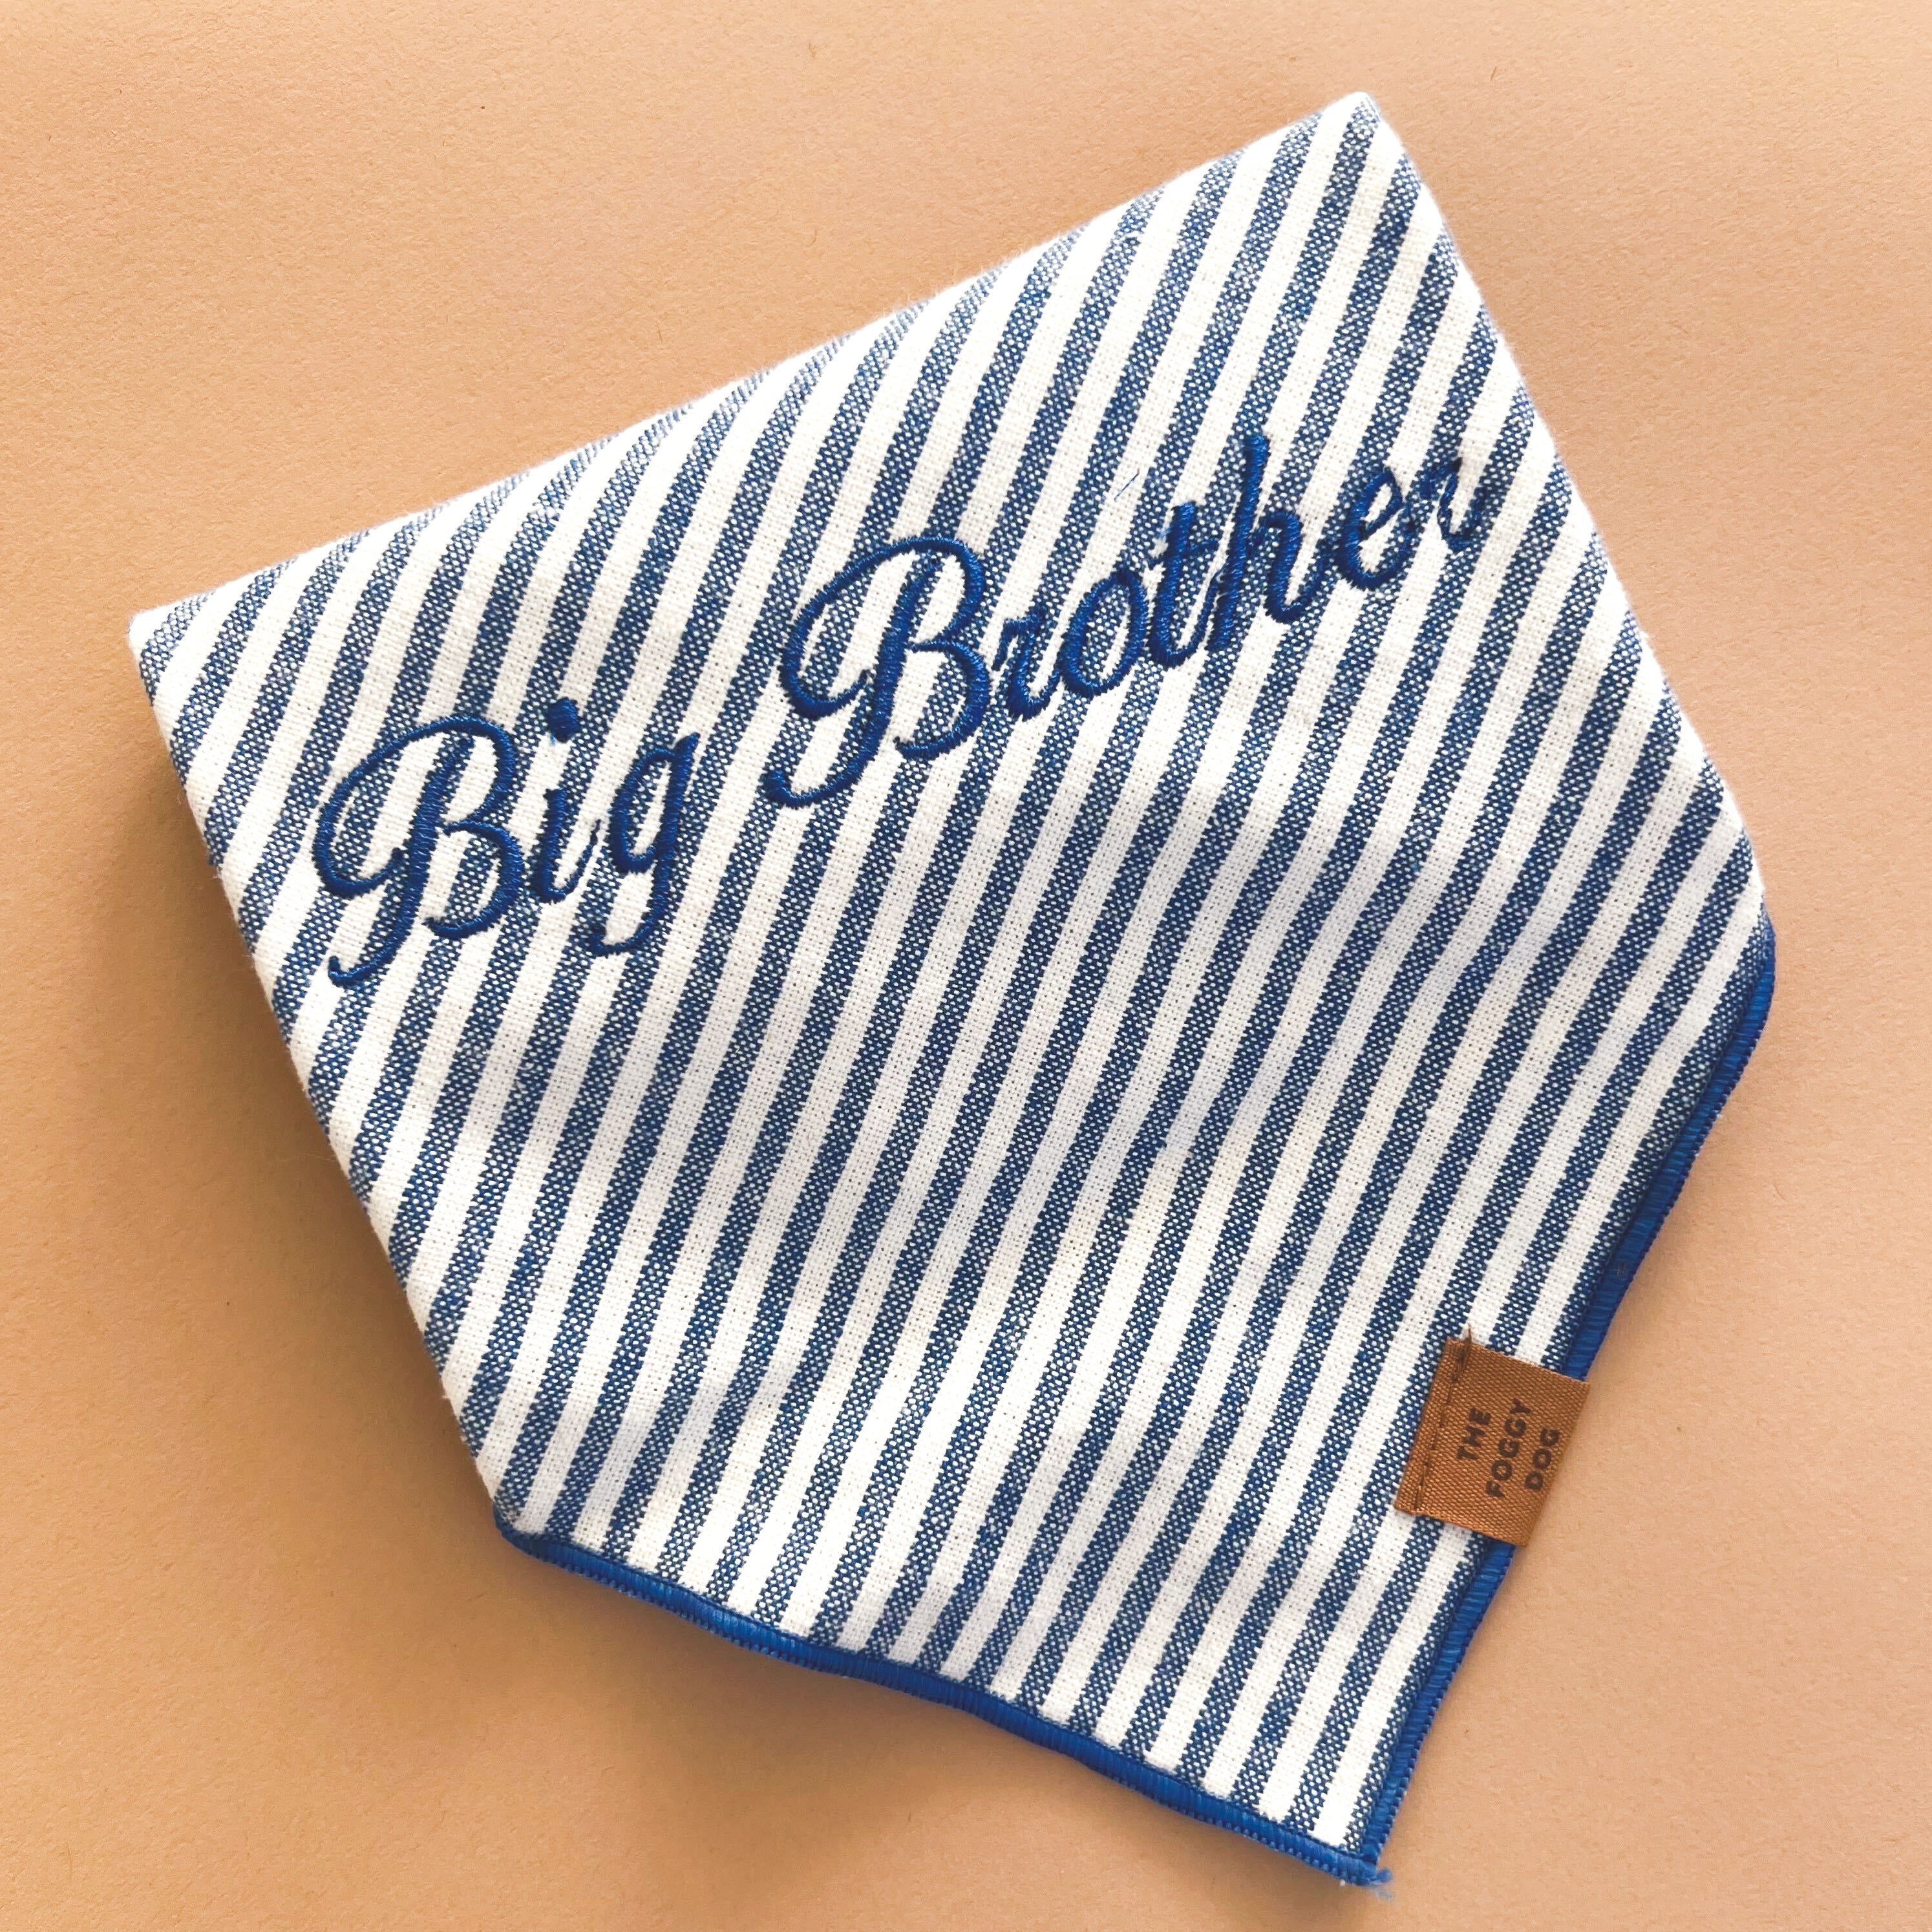 blue and white striped dog bandana with embroidered text